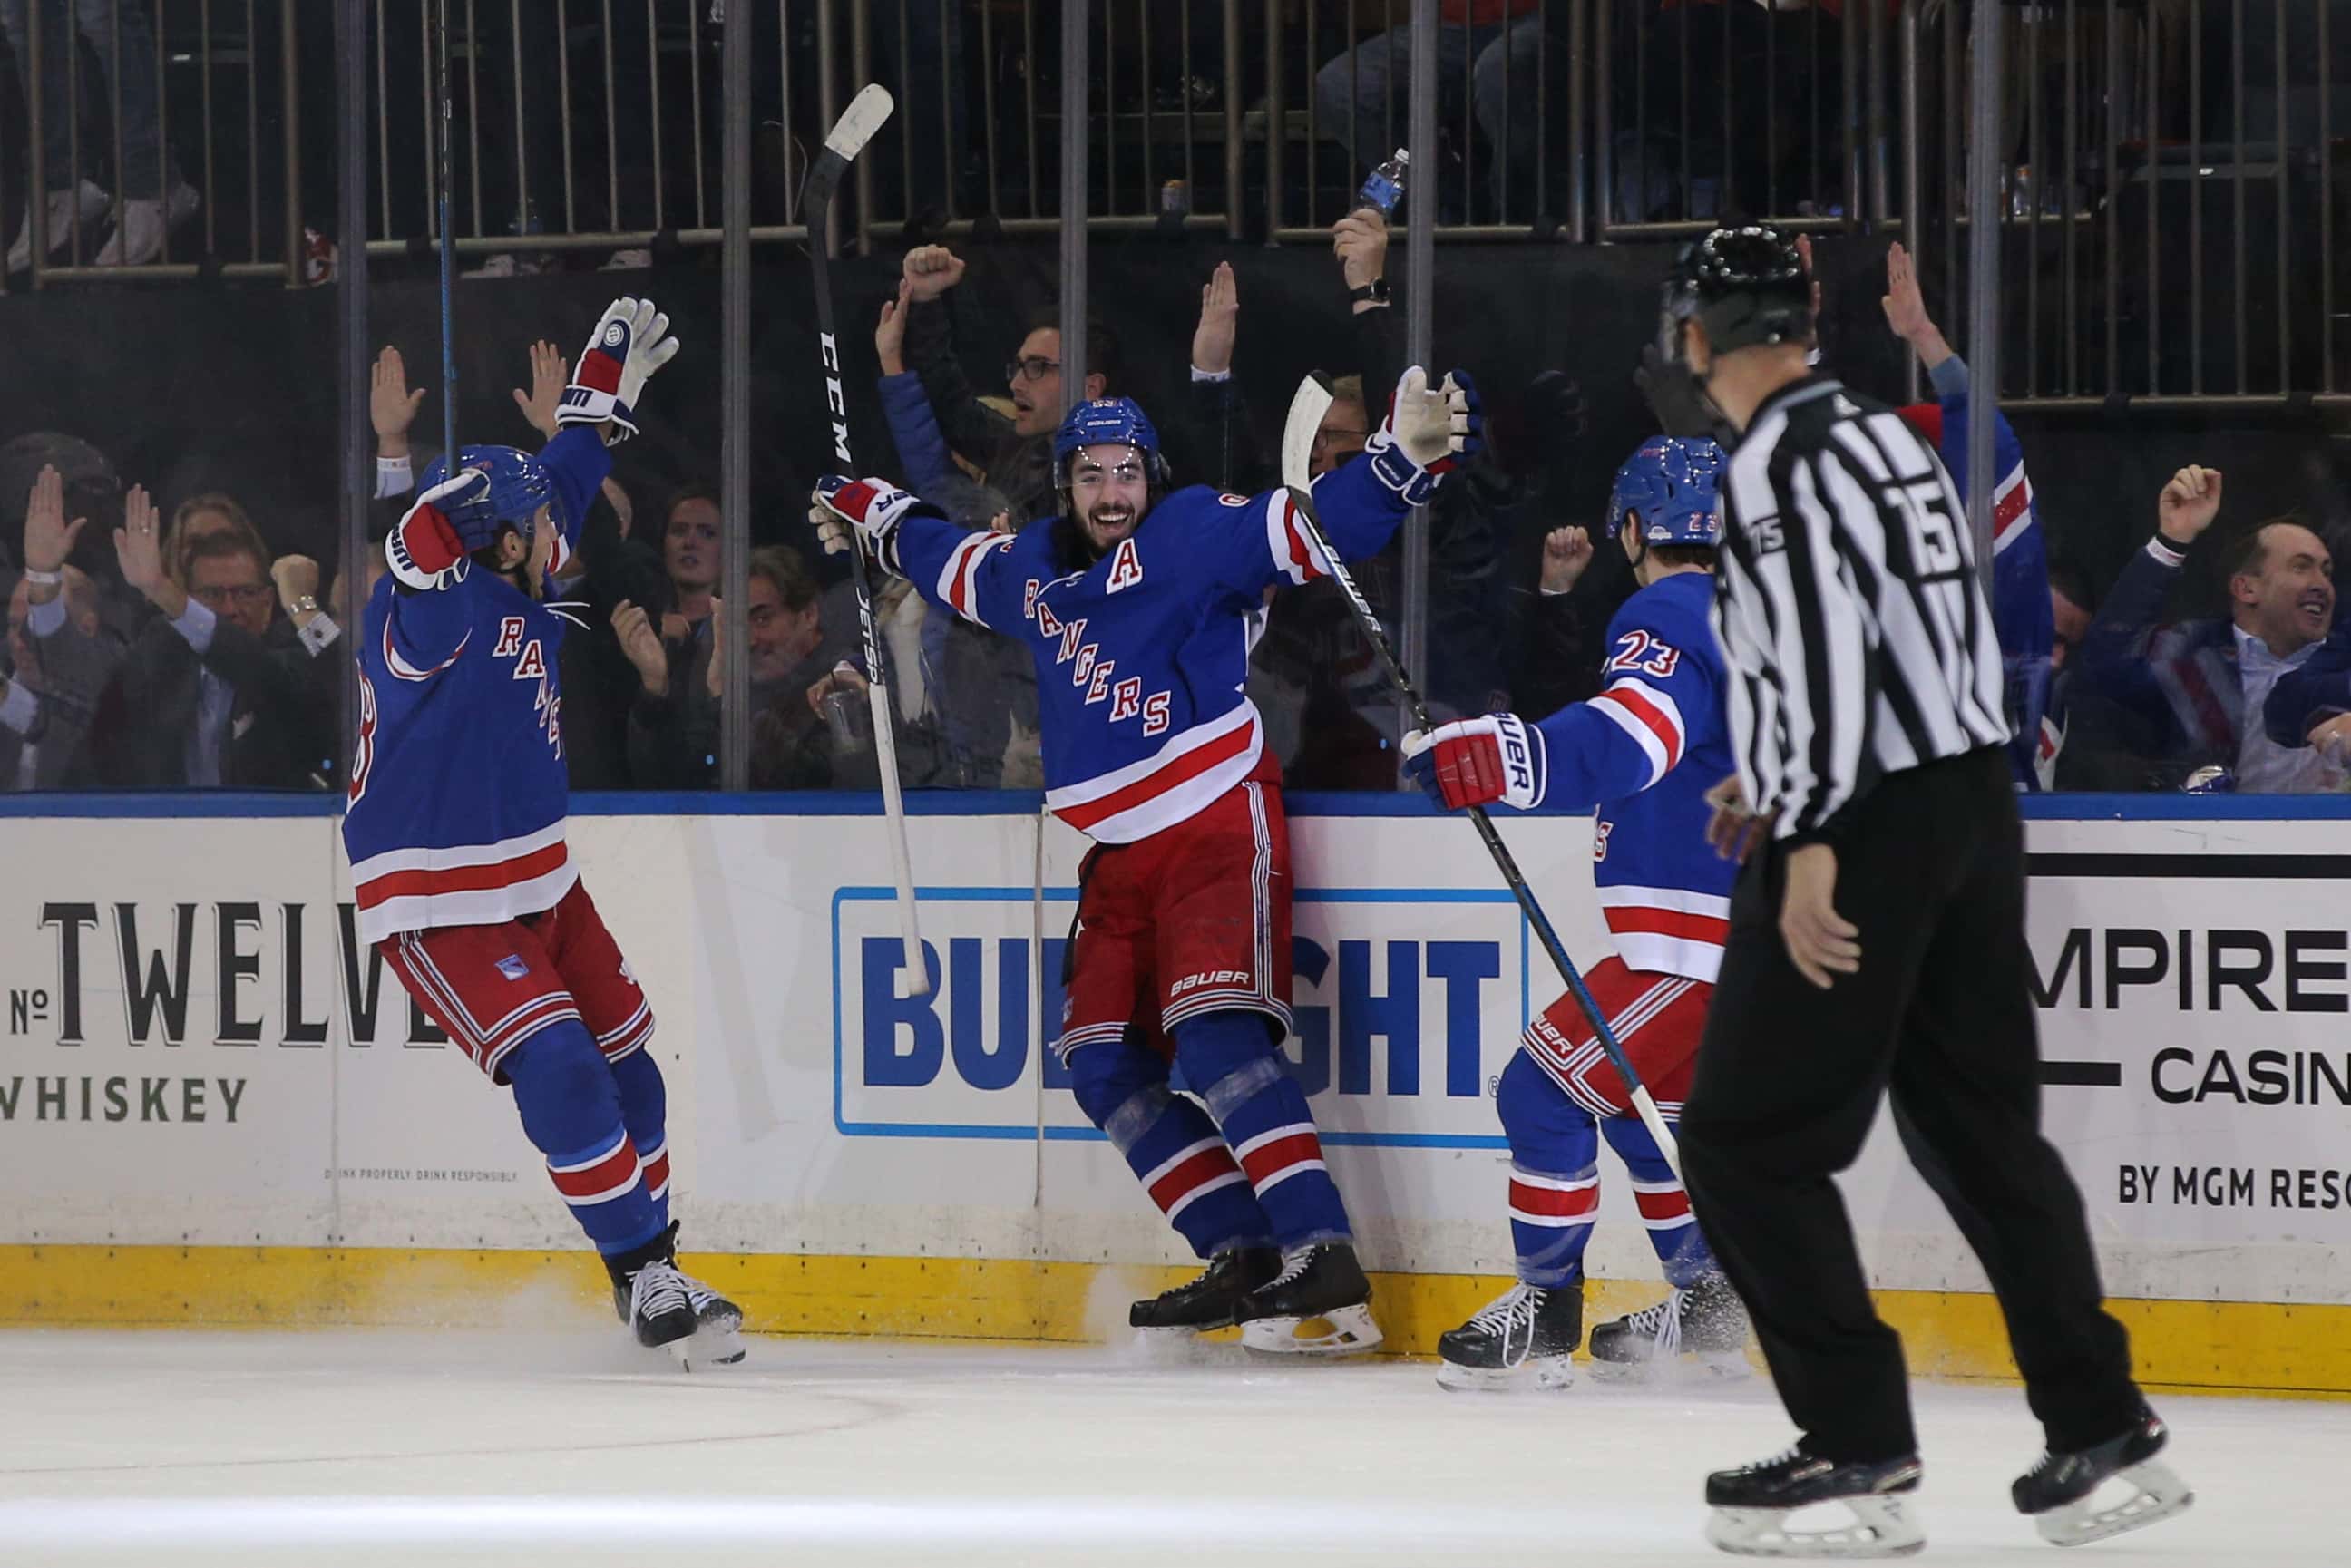 Mar 5, 2020; New York, New York, USA; New York Rangers center Mika Zibanejad (93) celebrates his fourth goal of the game against the Washington Capitals with teammates during the third period at Madison Square Garden. Mandatory Credit: Brad Penner-USA TODAY Sports